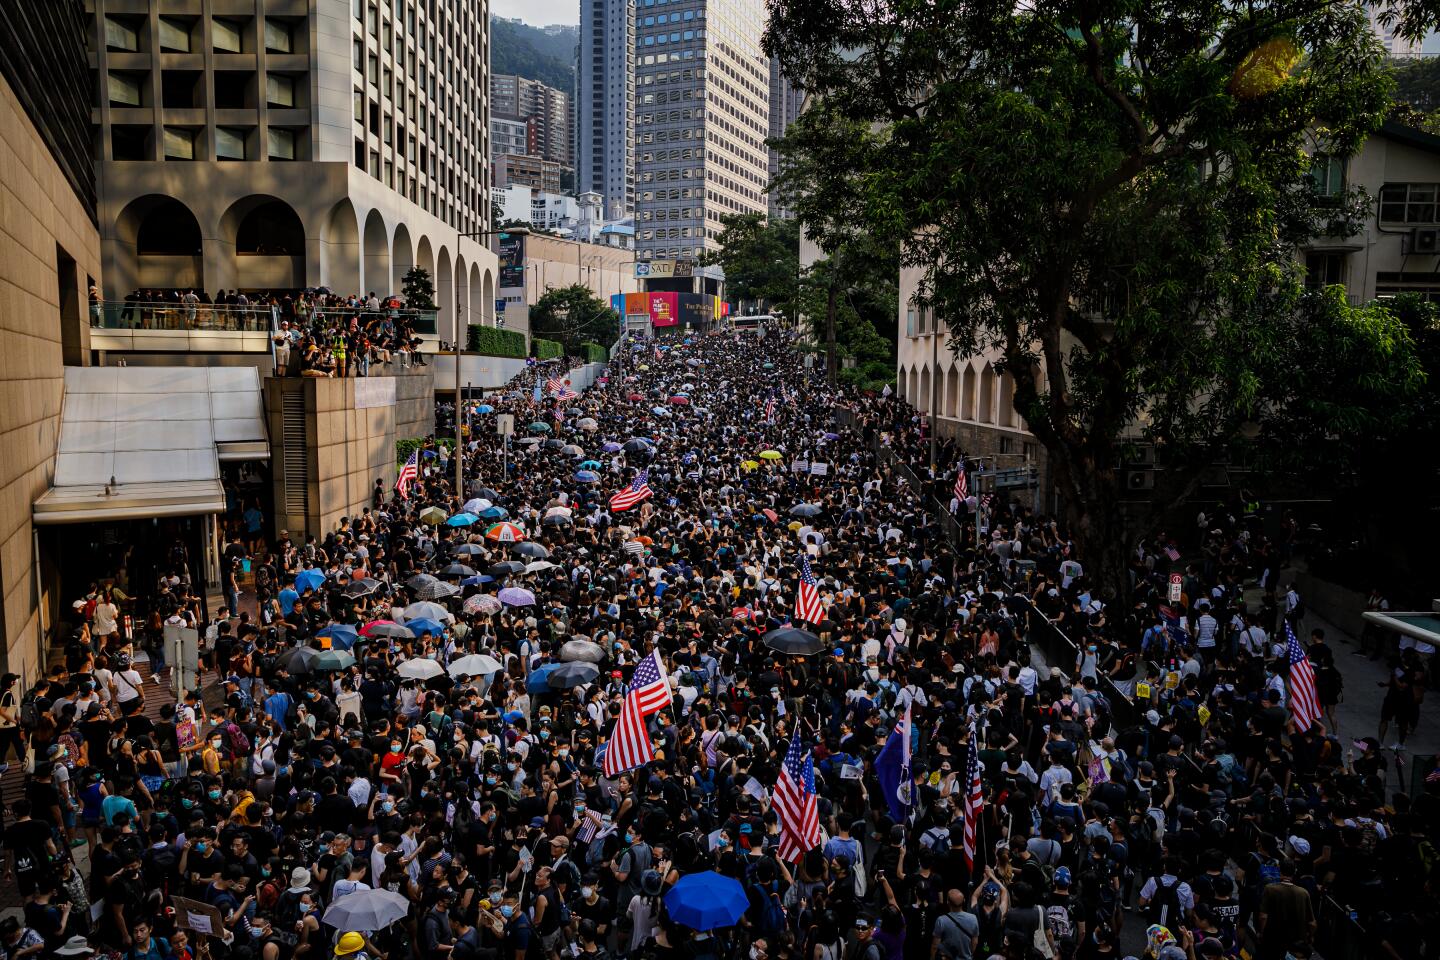 HONG KONG, CHINA -- SUNDAY, SEPTEMBER 8, 2019: Demonstrators march uphill towards the United States Consulate for a pro-democracy rally in Hong Kong, on Sept. 8, 2019. (Marcus Yam / Los Angeles Times)